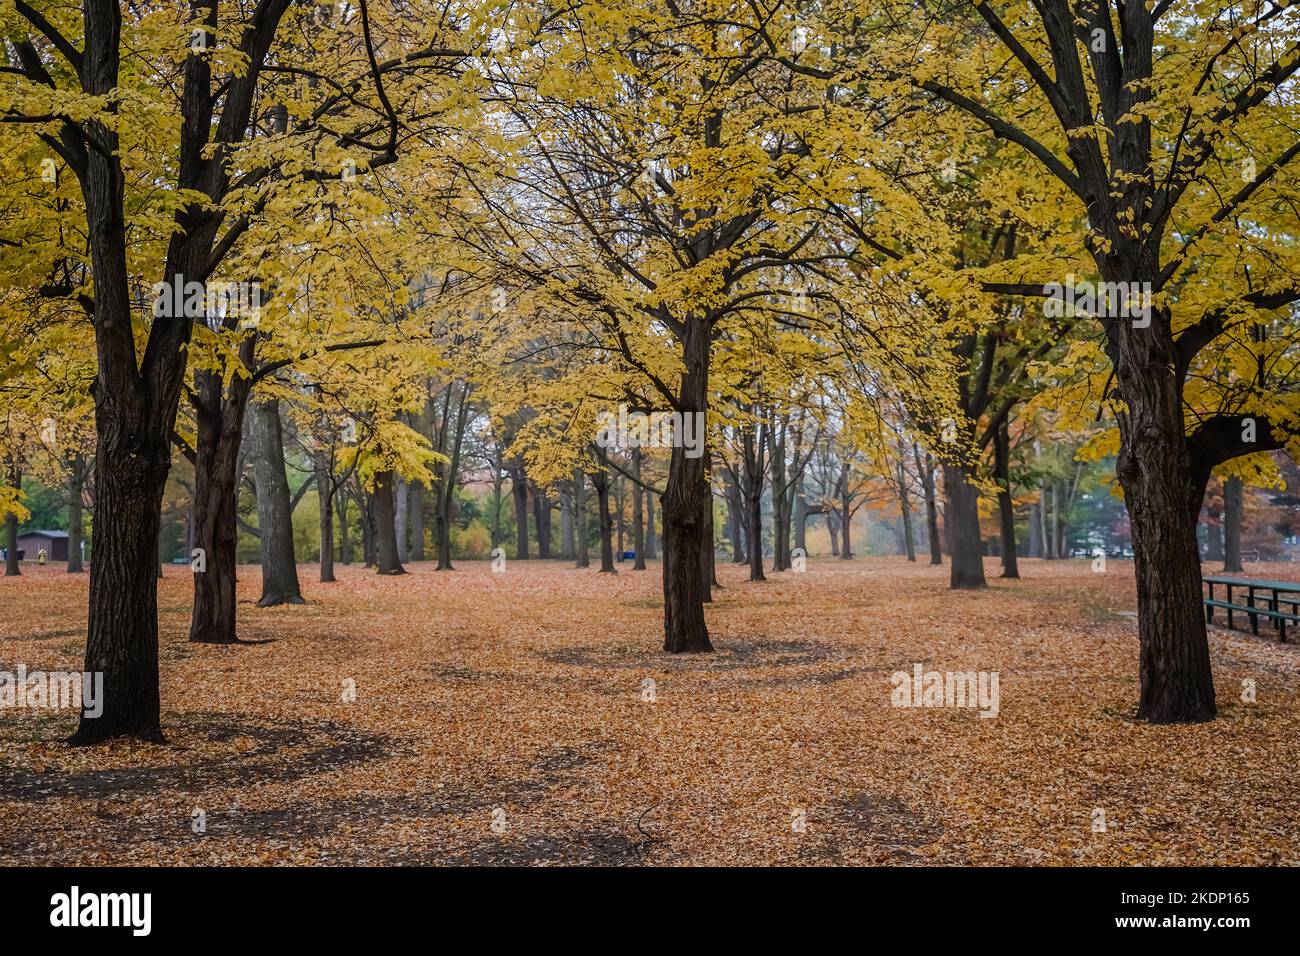 Many standing trees with yellow leaves and fallen drived leafs on the ground Stock Photo